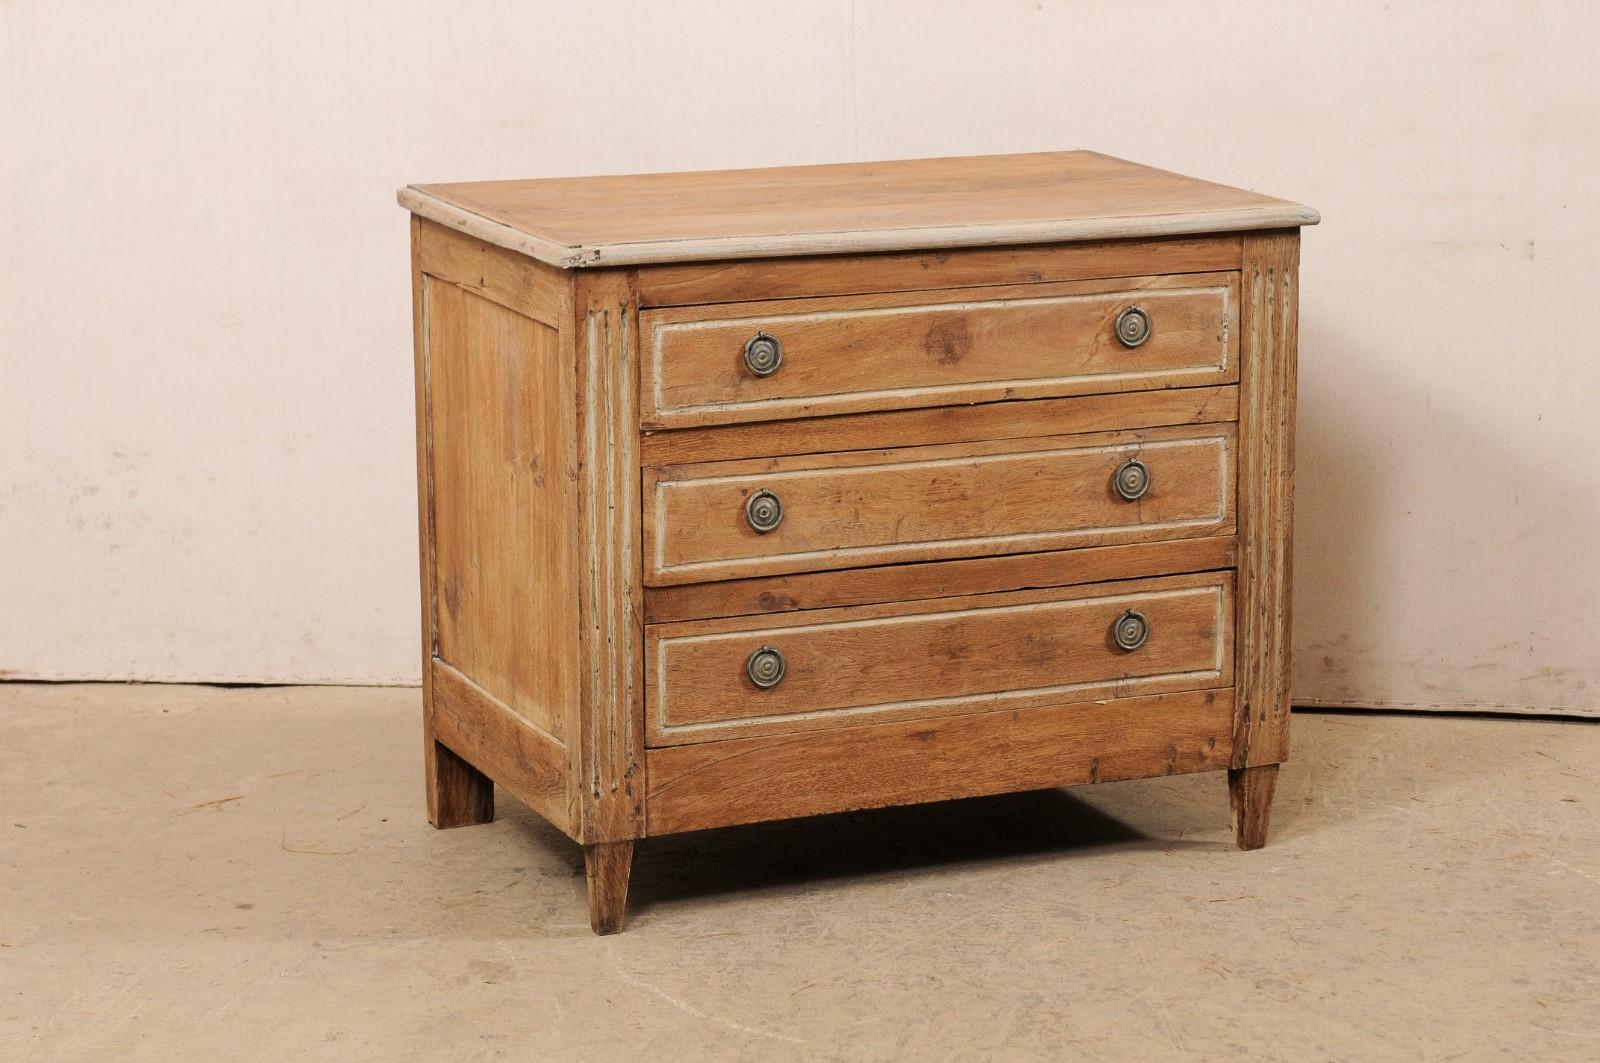 A French wooden three-drawer commode from the 18th century. This antique chest from France is fitted with three graduated drawers which are flanked within fluted front side posts. The skirt is straight and clean. And this chest is raised upon square